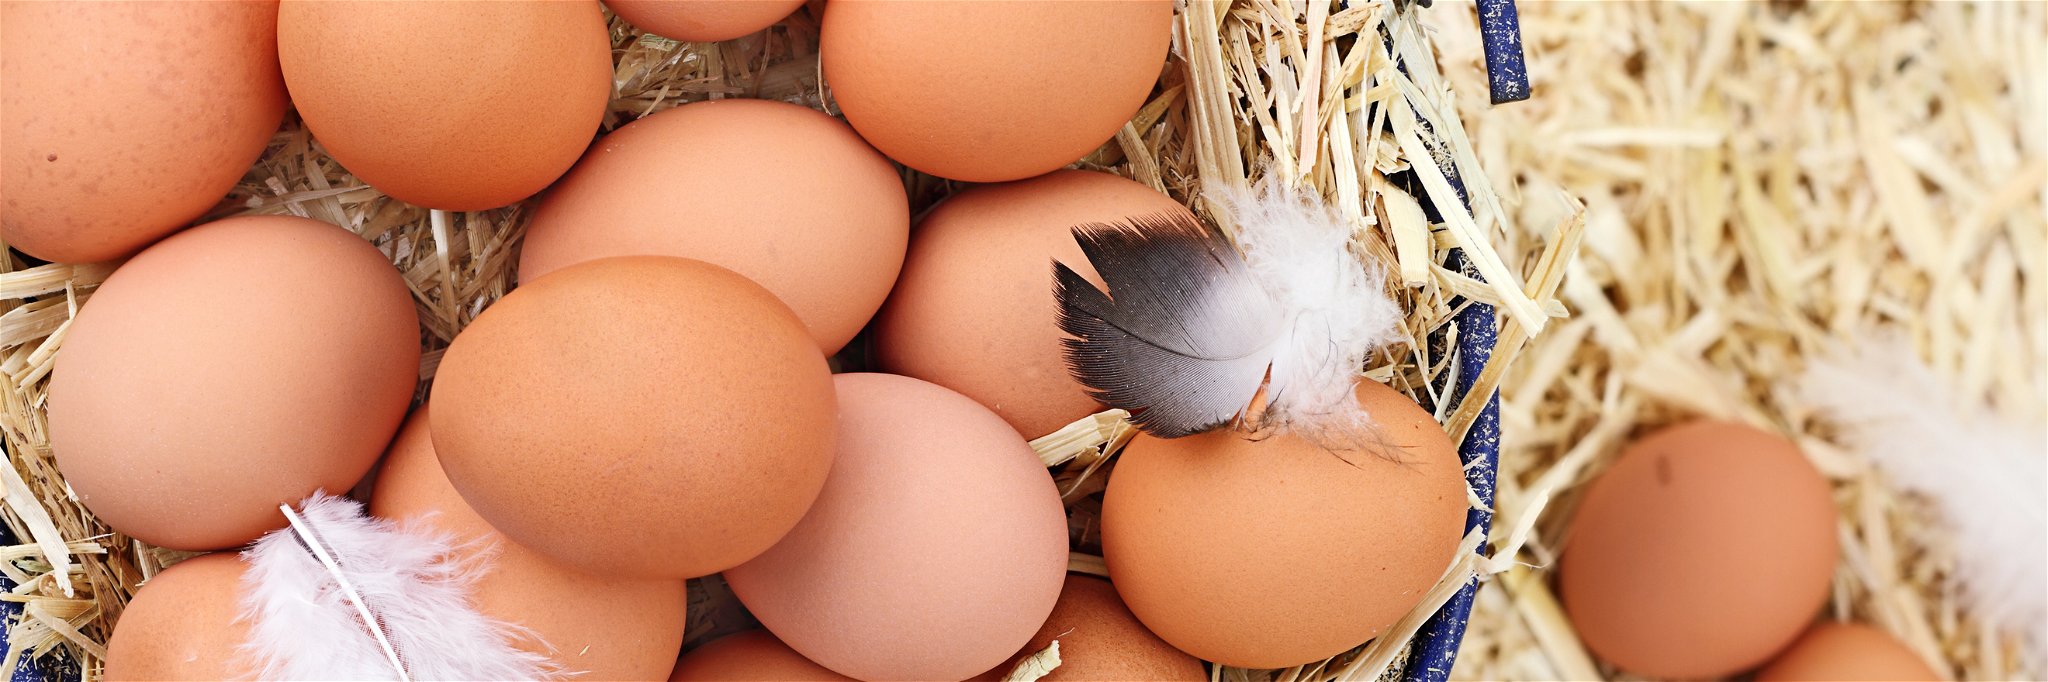 Supermarkets must add the new labels on many egg boxes starting Monday